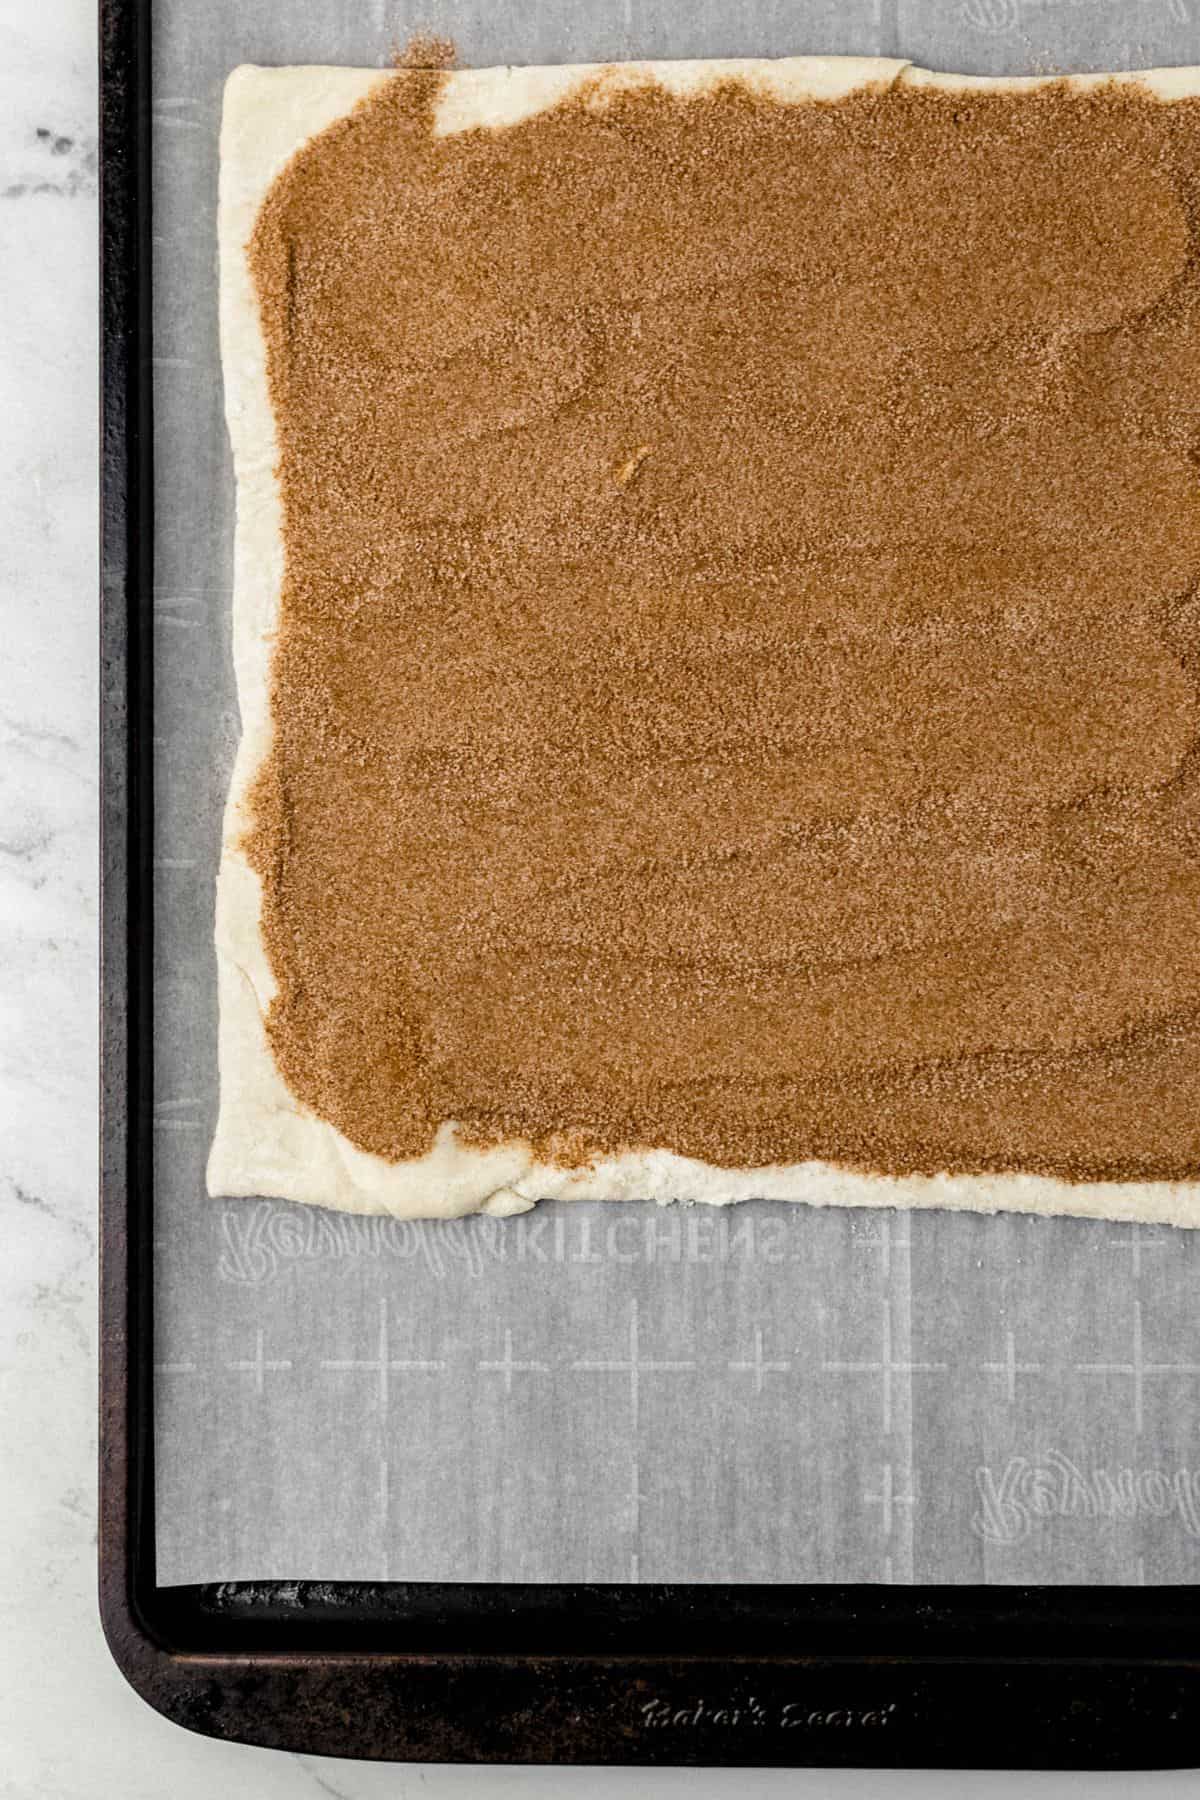 puff pastry dough topped with cinnamon sugar mixture on parchment lined baking sheet 